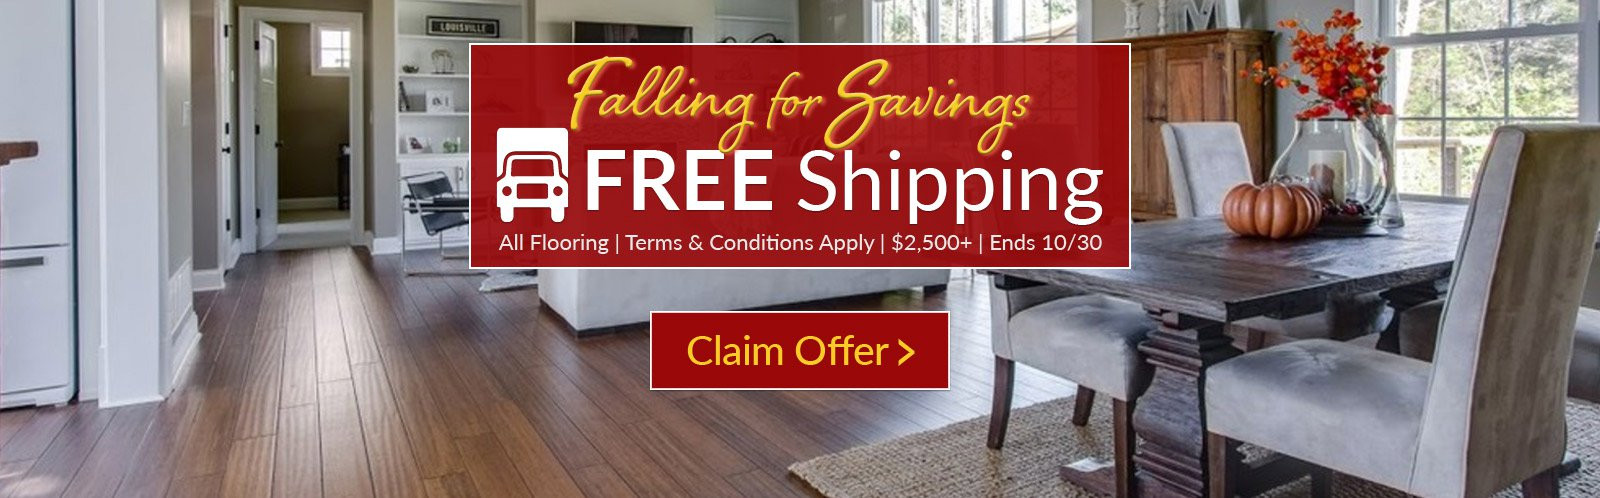 14 Stunning Hardwood Floor Refinishing Longview Wa 2024 free download hardwood floor refinishing longview wa of green building construction materials and home decor cali bamboo pertaining to your shopping cart is empty